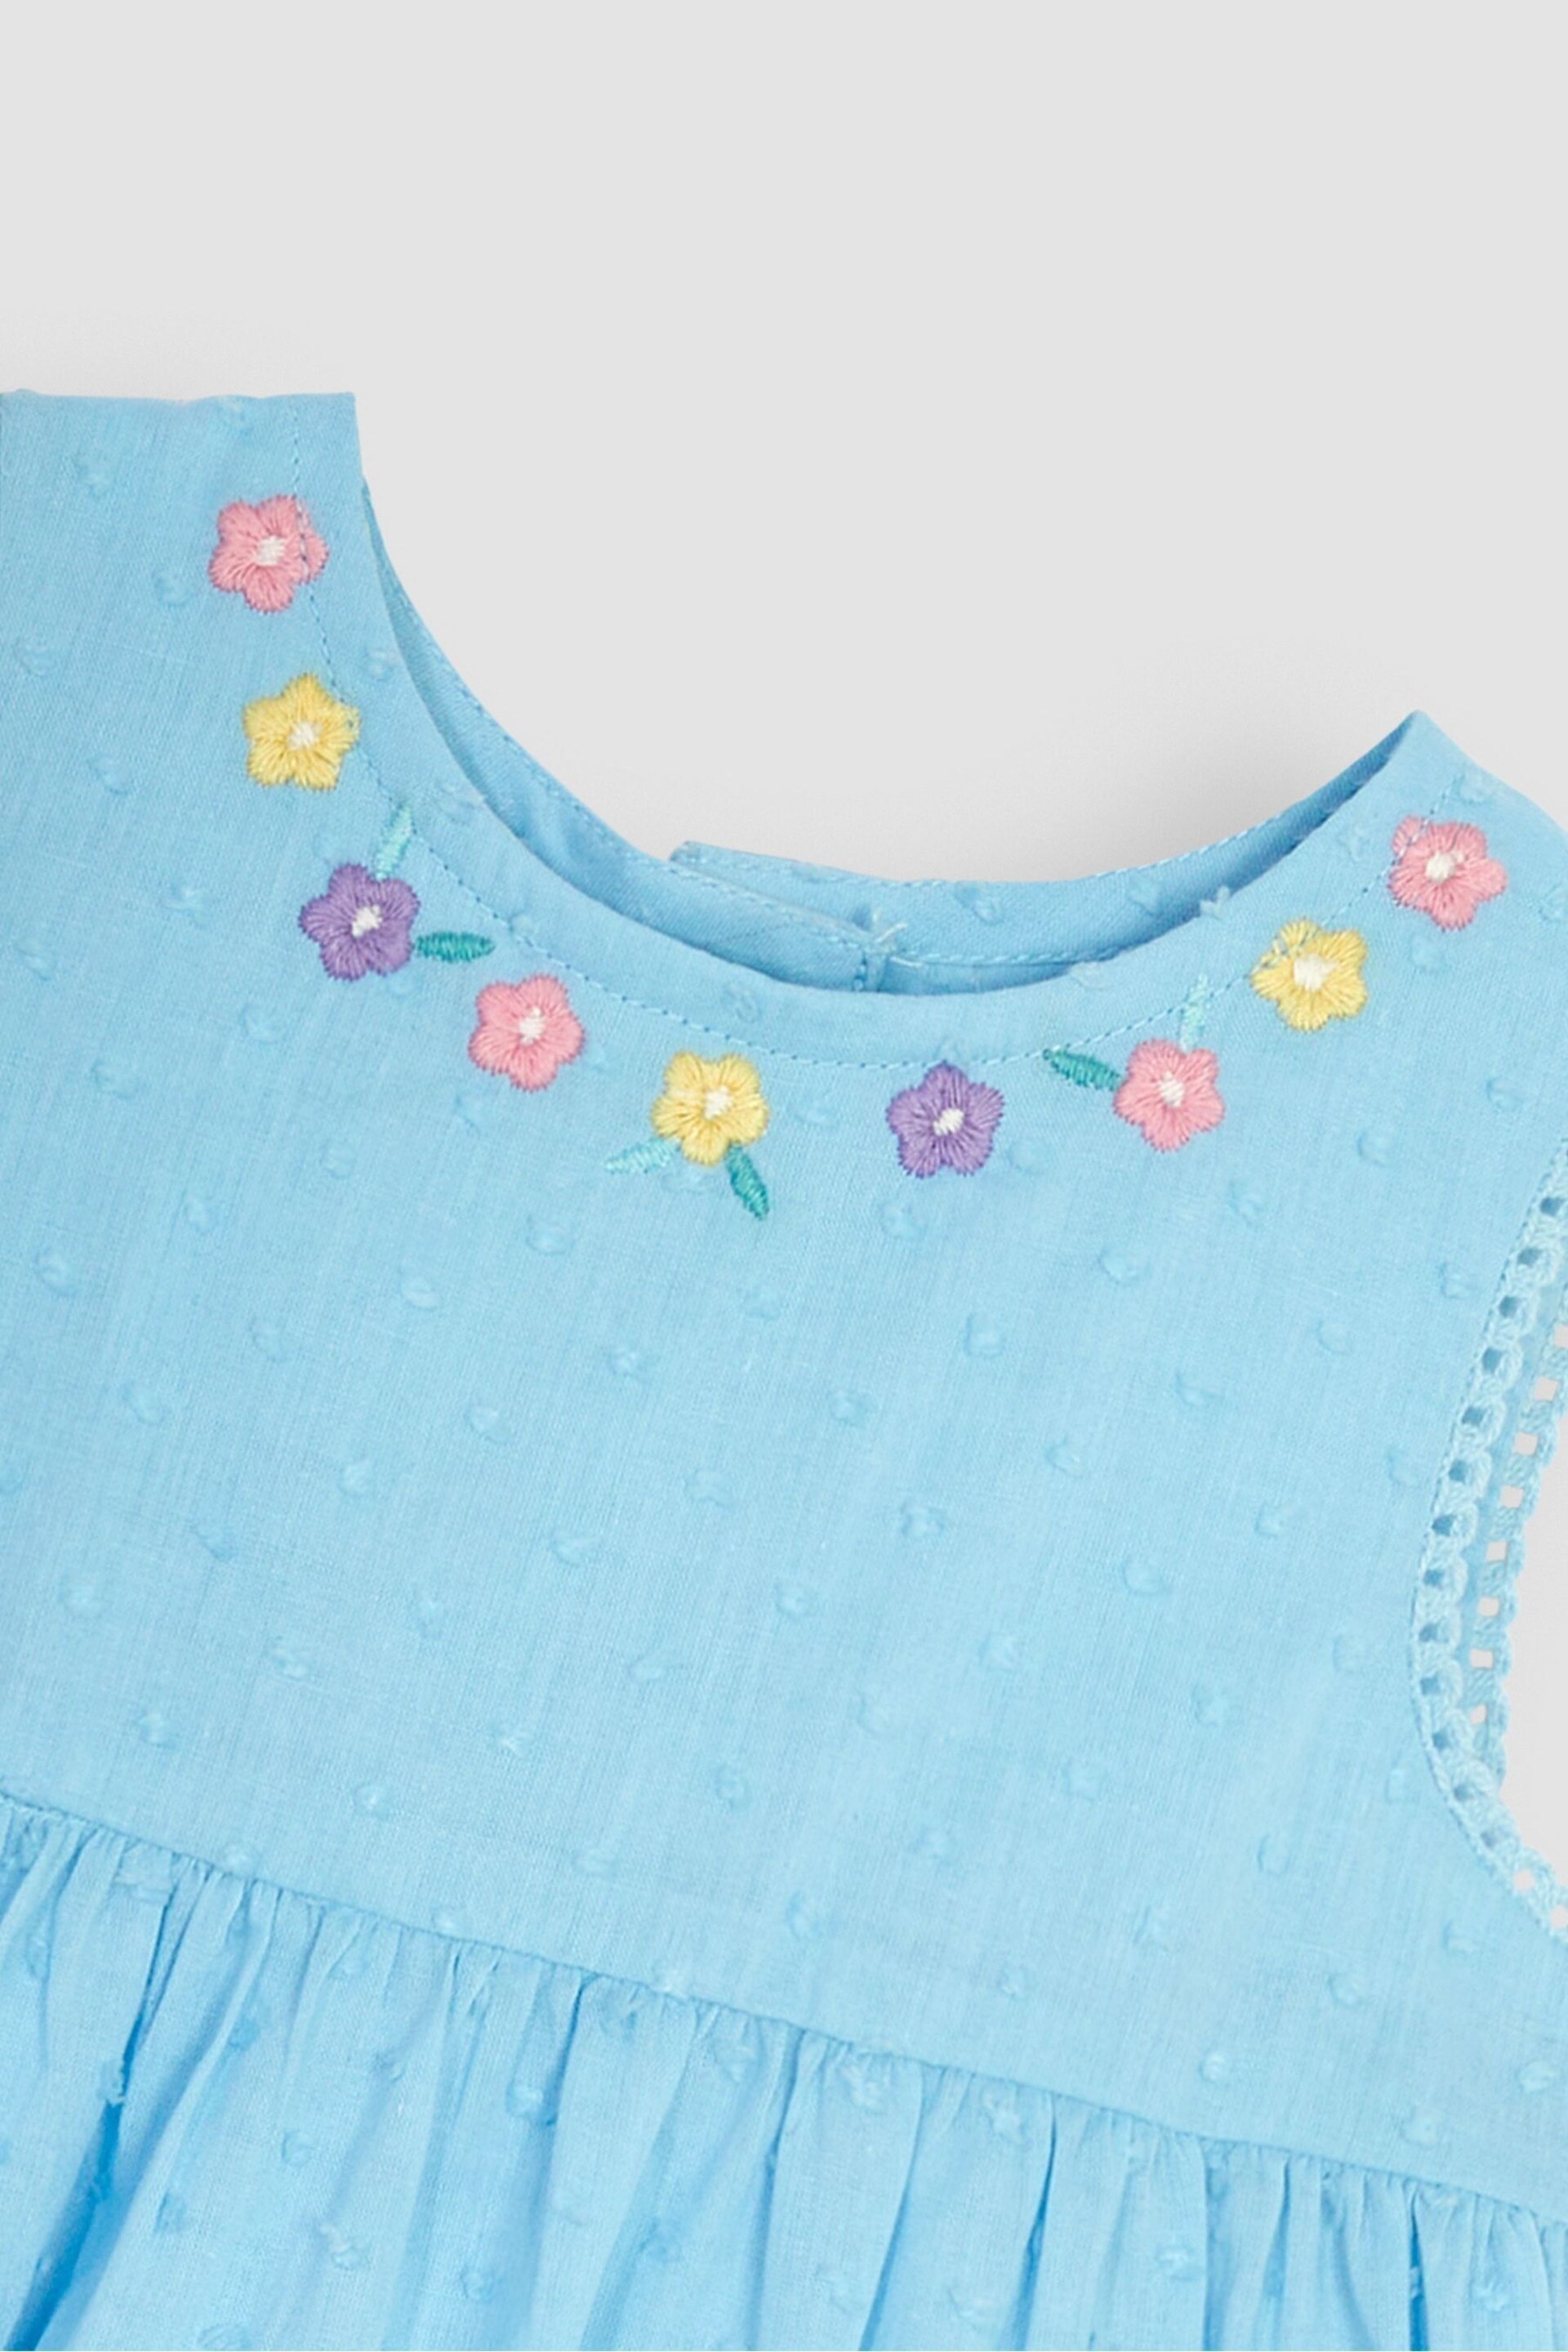 JoJo Maman Bébé Blue Mouse Floral Embroidered Baby Dress - Image 4 of 4